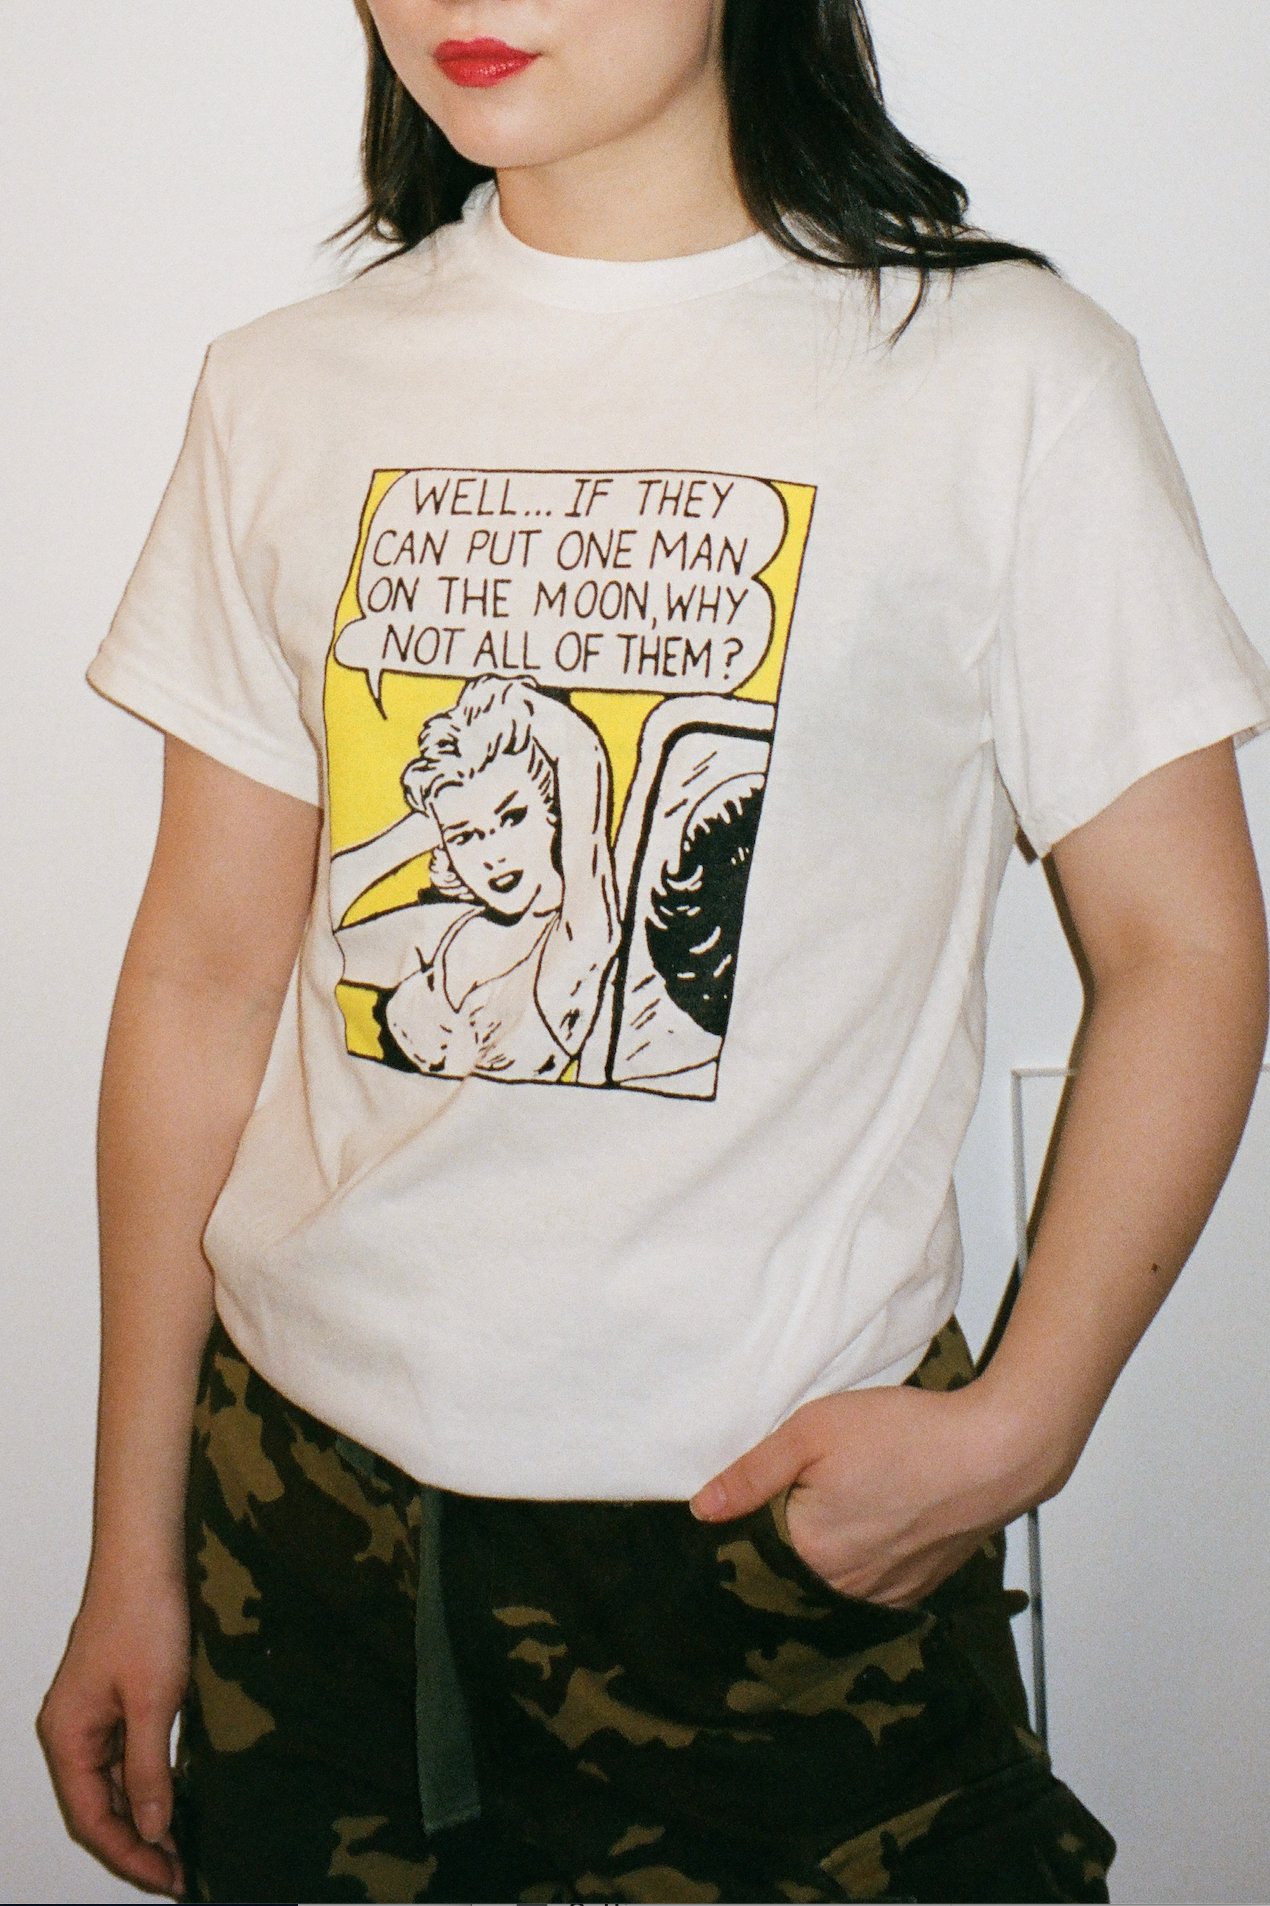 A white cotton t-shirt with a black, white, and yellow square image of a woman saying "Well... if they can put one man on the moon, why not all of them?" centers on the chest of the shirt.